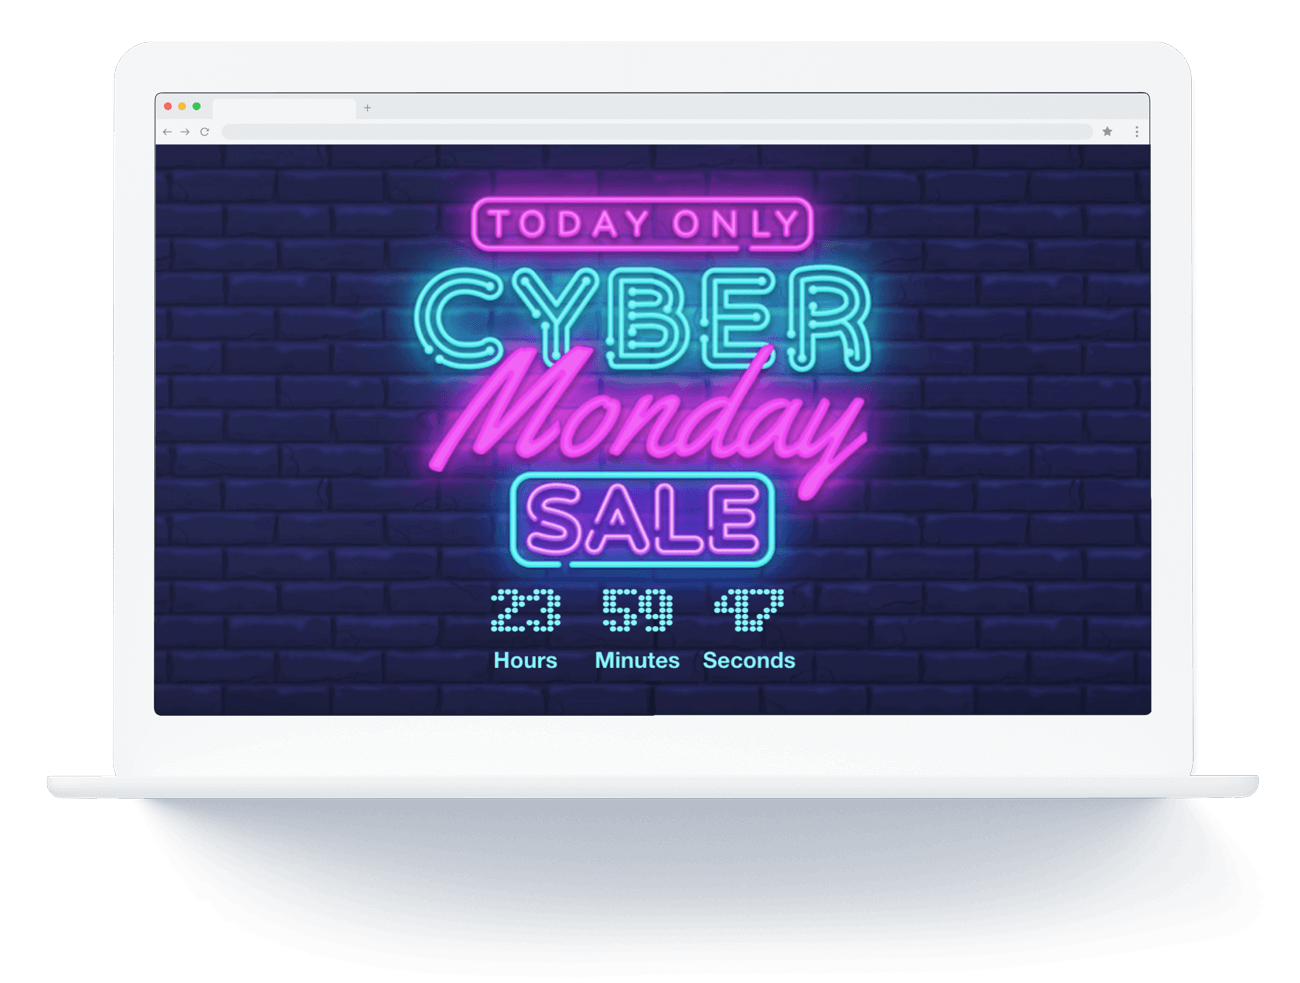 A screenshot of JustUno pop-up promoting a Cyber Monday sale.